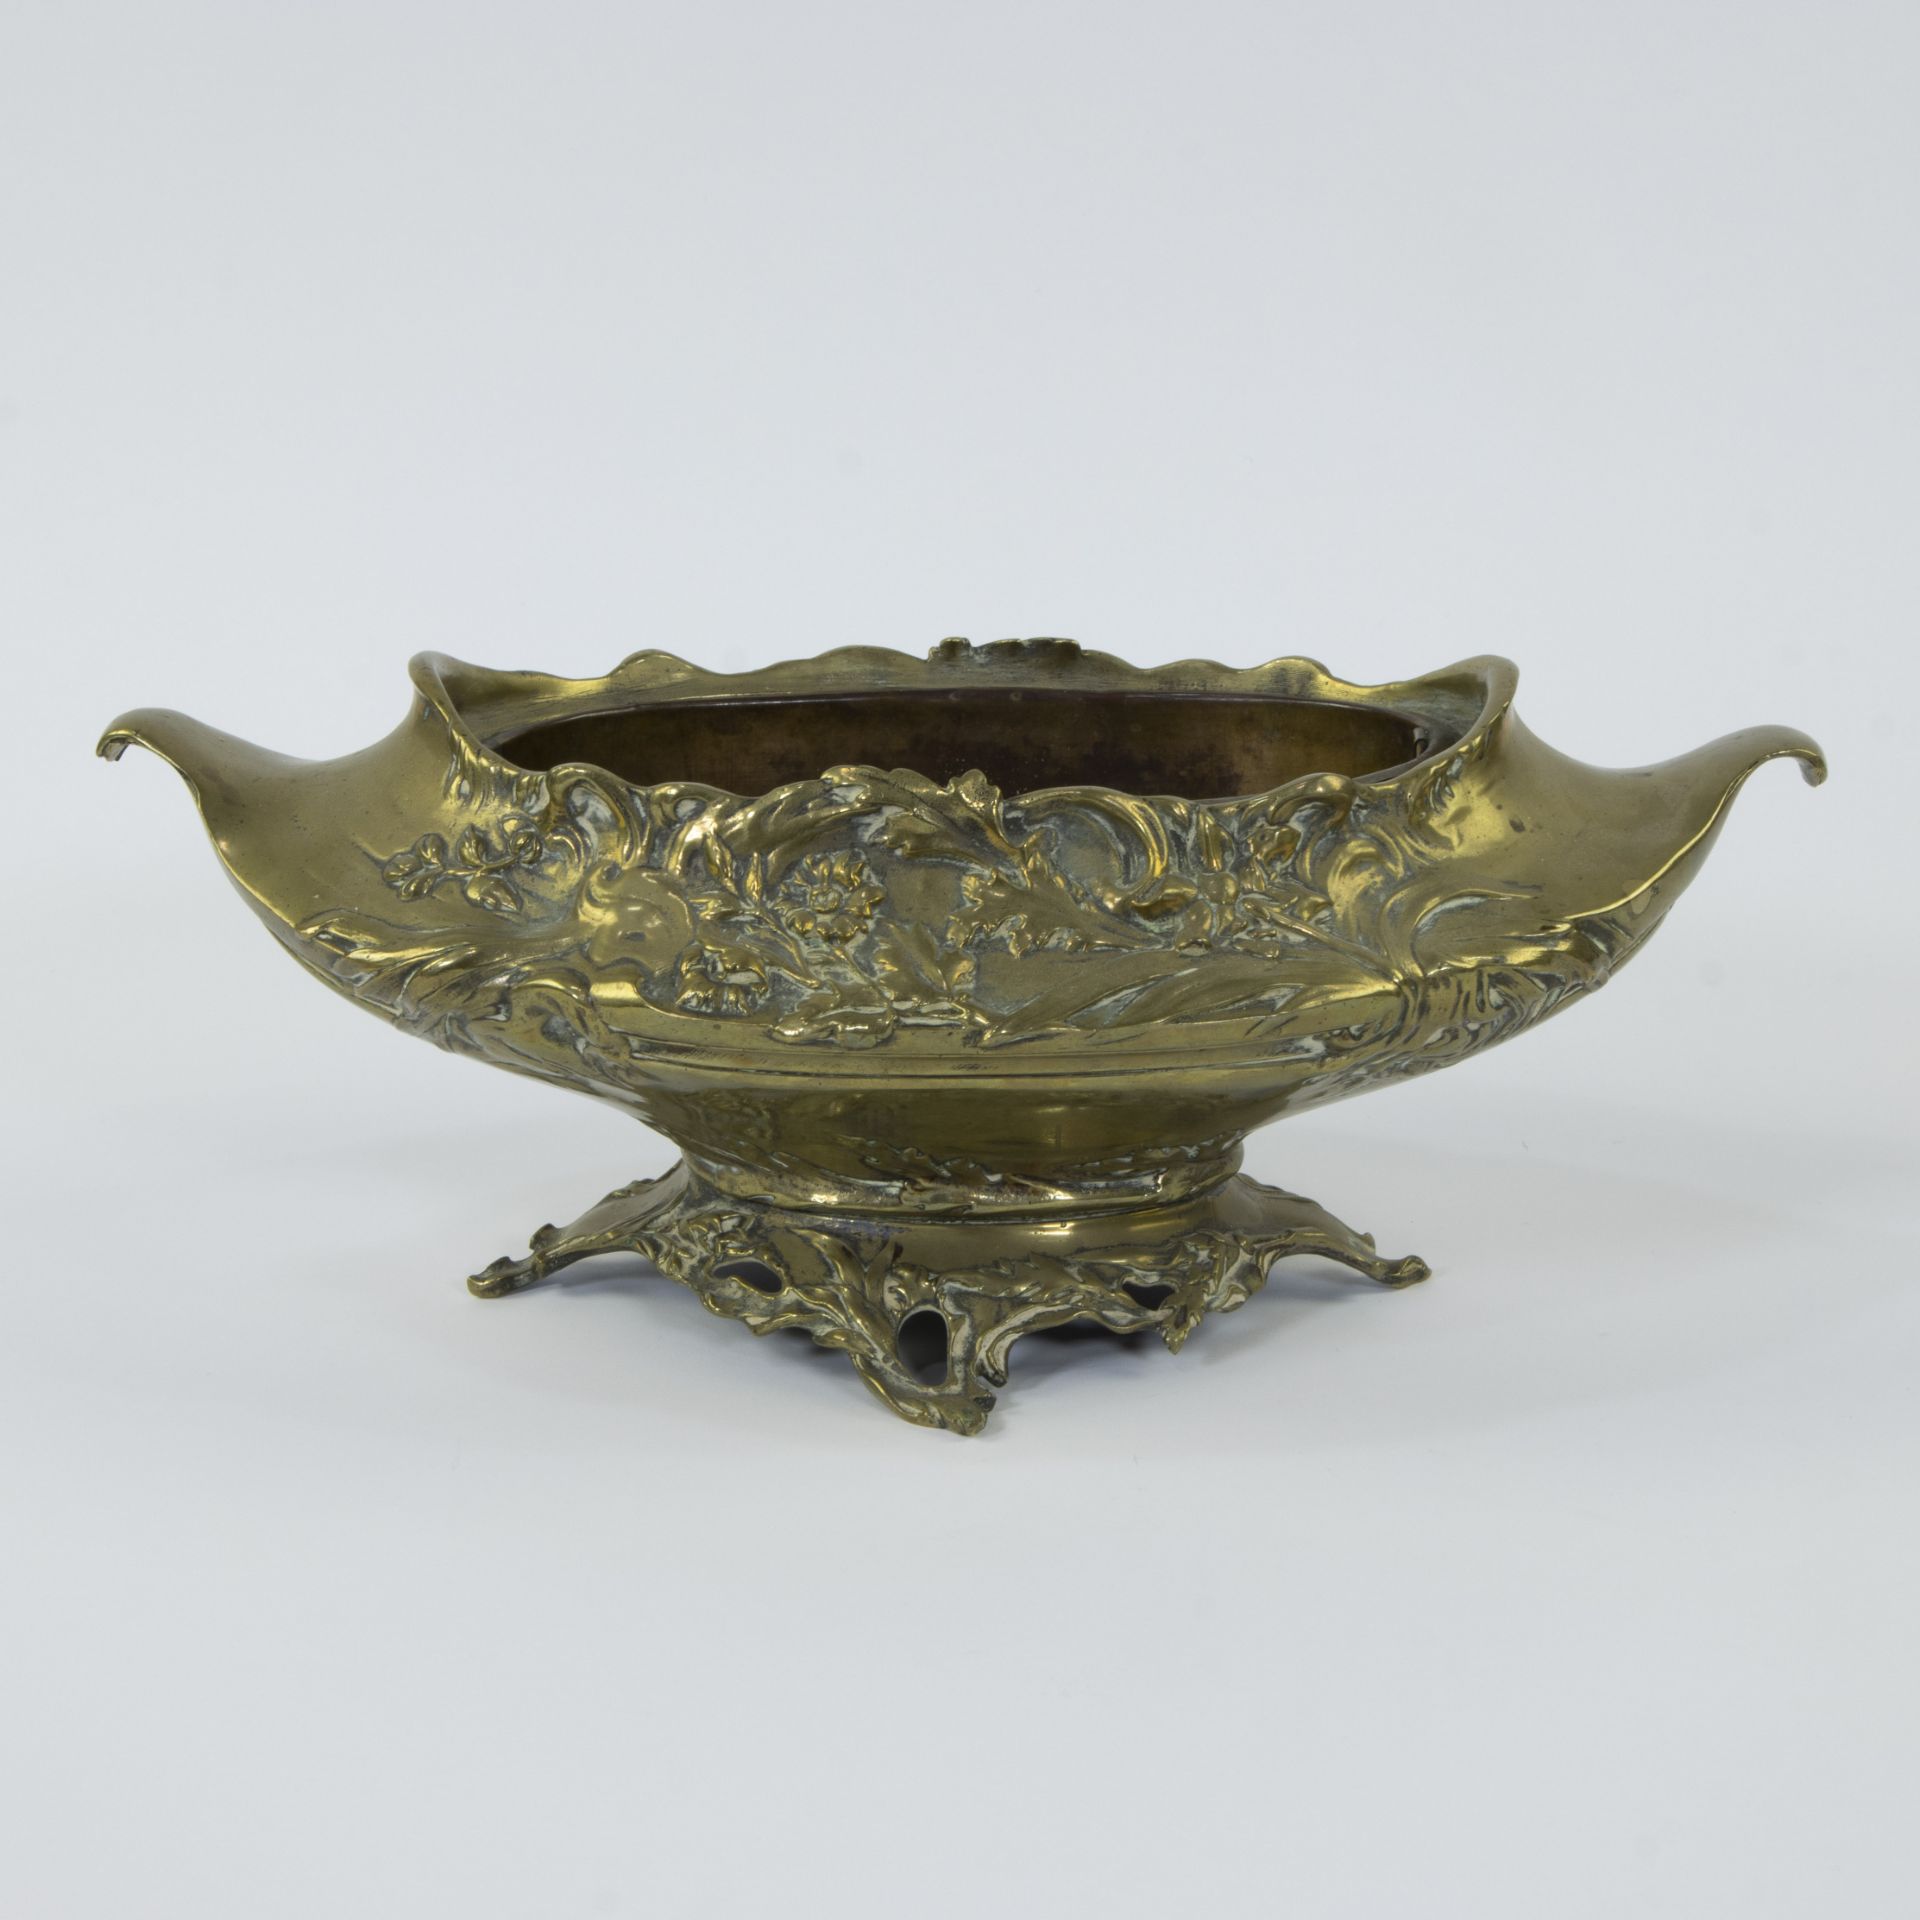 Jardinière in gilt brass decorated with floral motifs and a bird, circa 1920 - Image 3 of 4